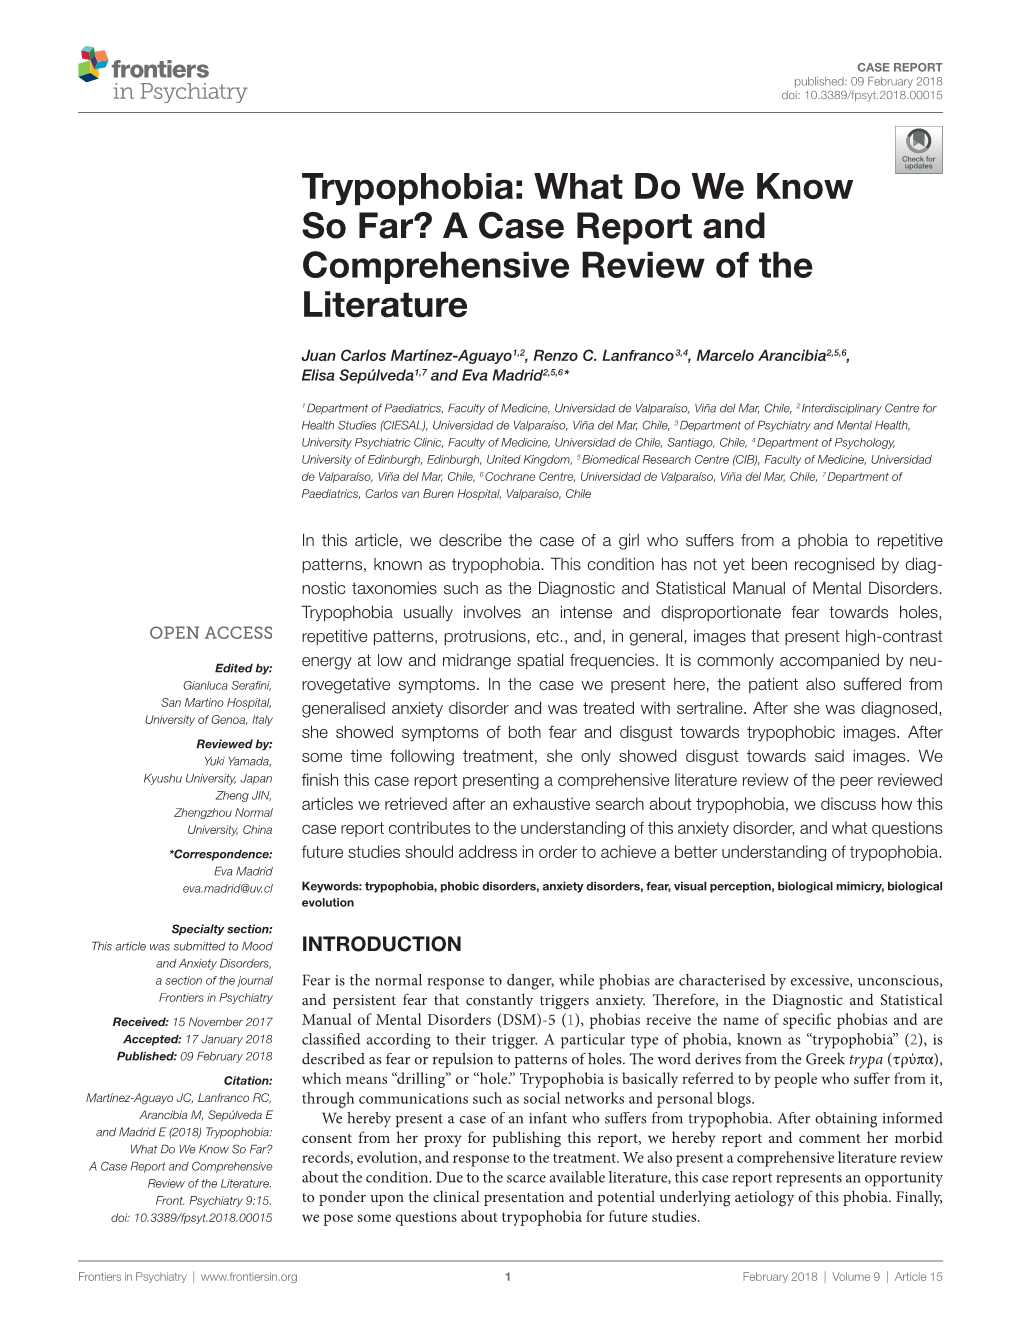 Trypophobia: What Do We Know So Far? a Case Report and Comprehensive Review of the Literature